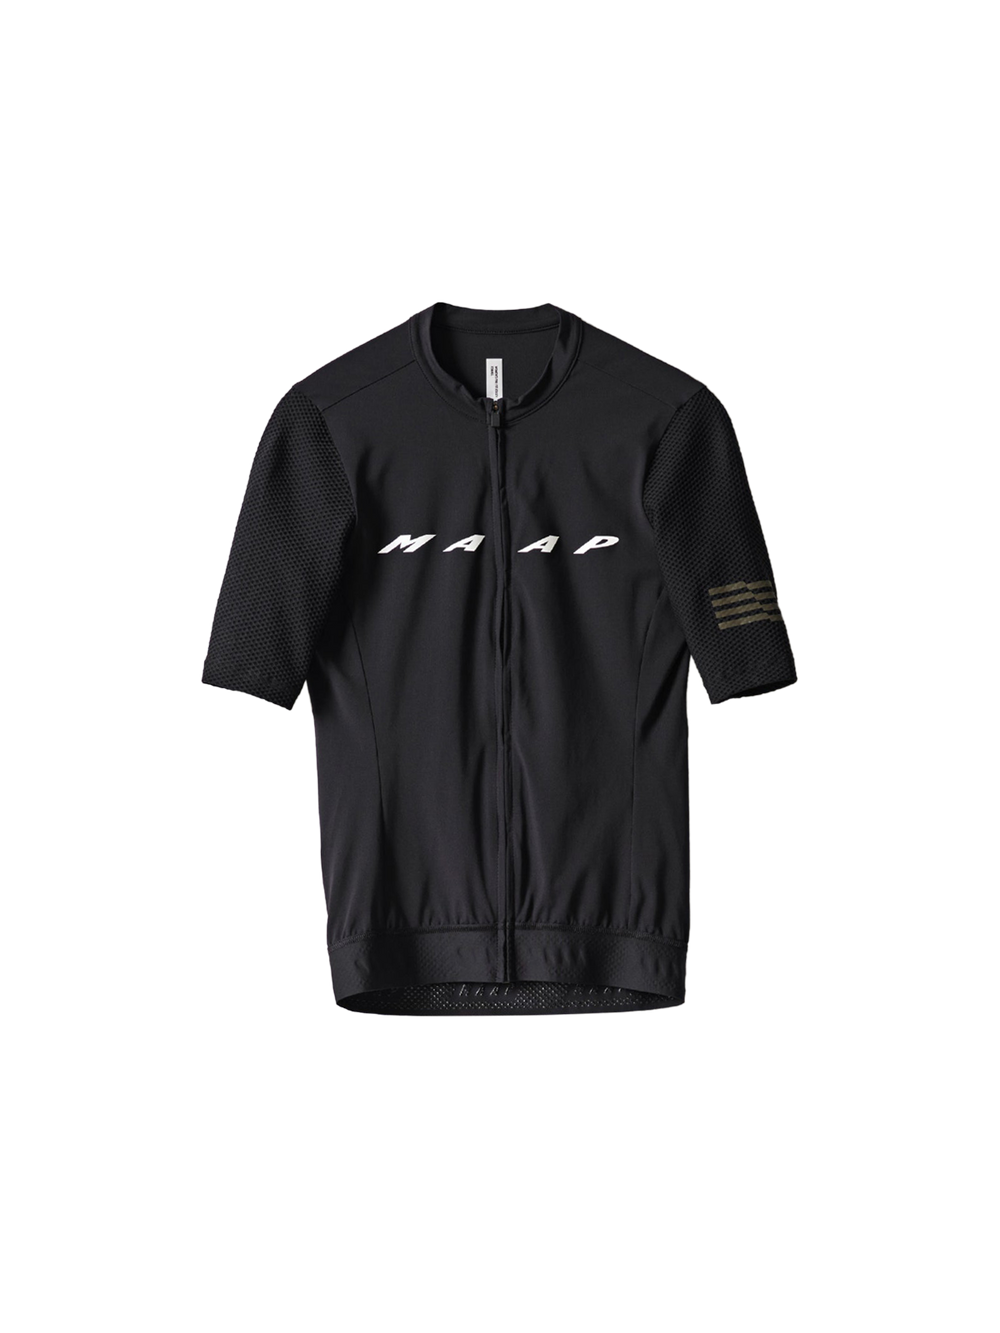 Product Image for Evade Pro Base Jersey